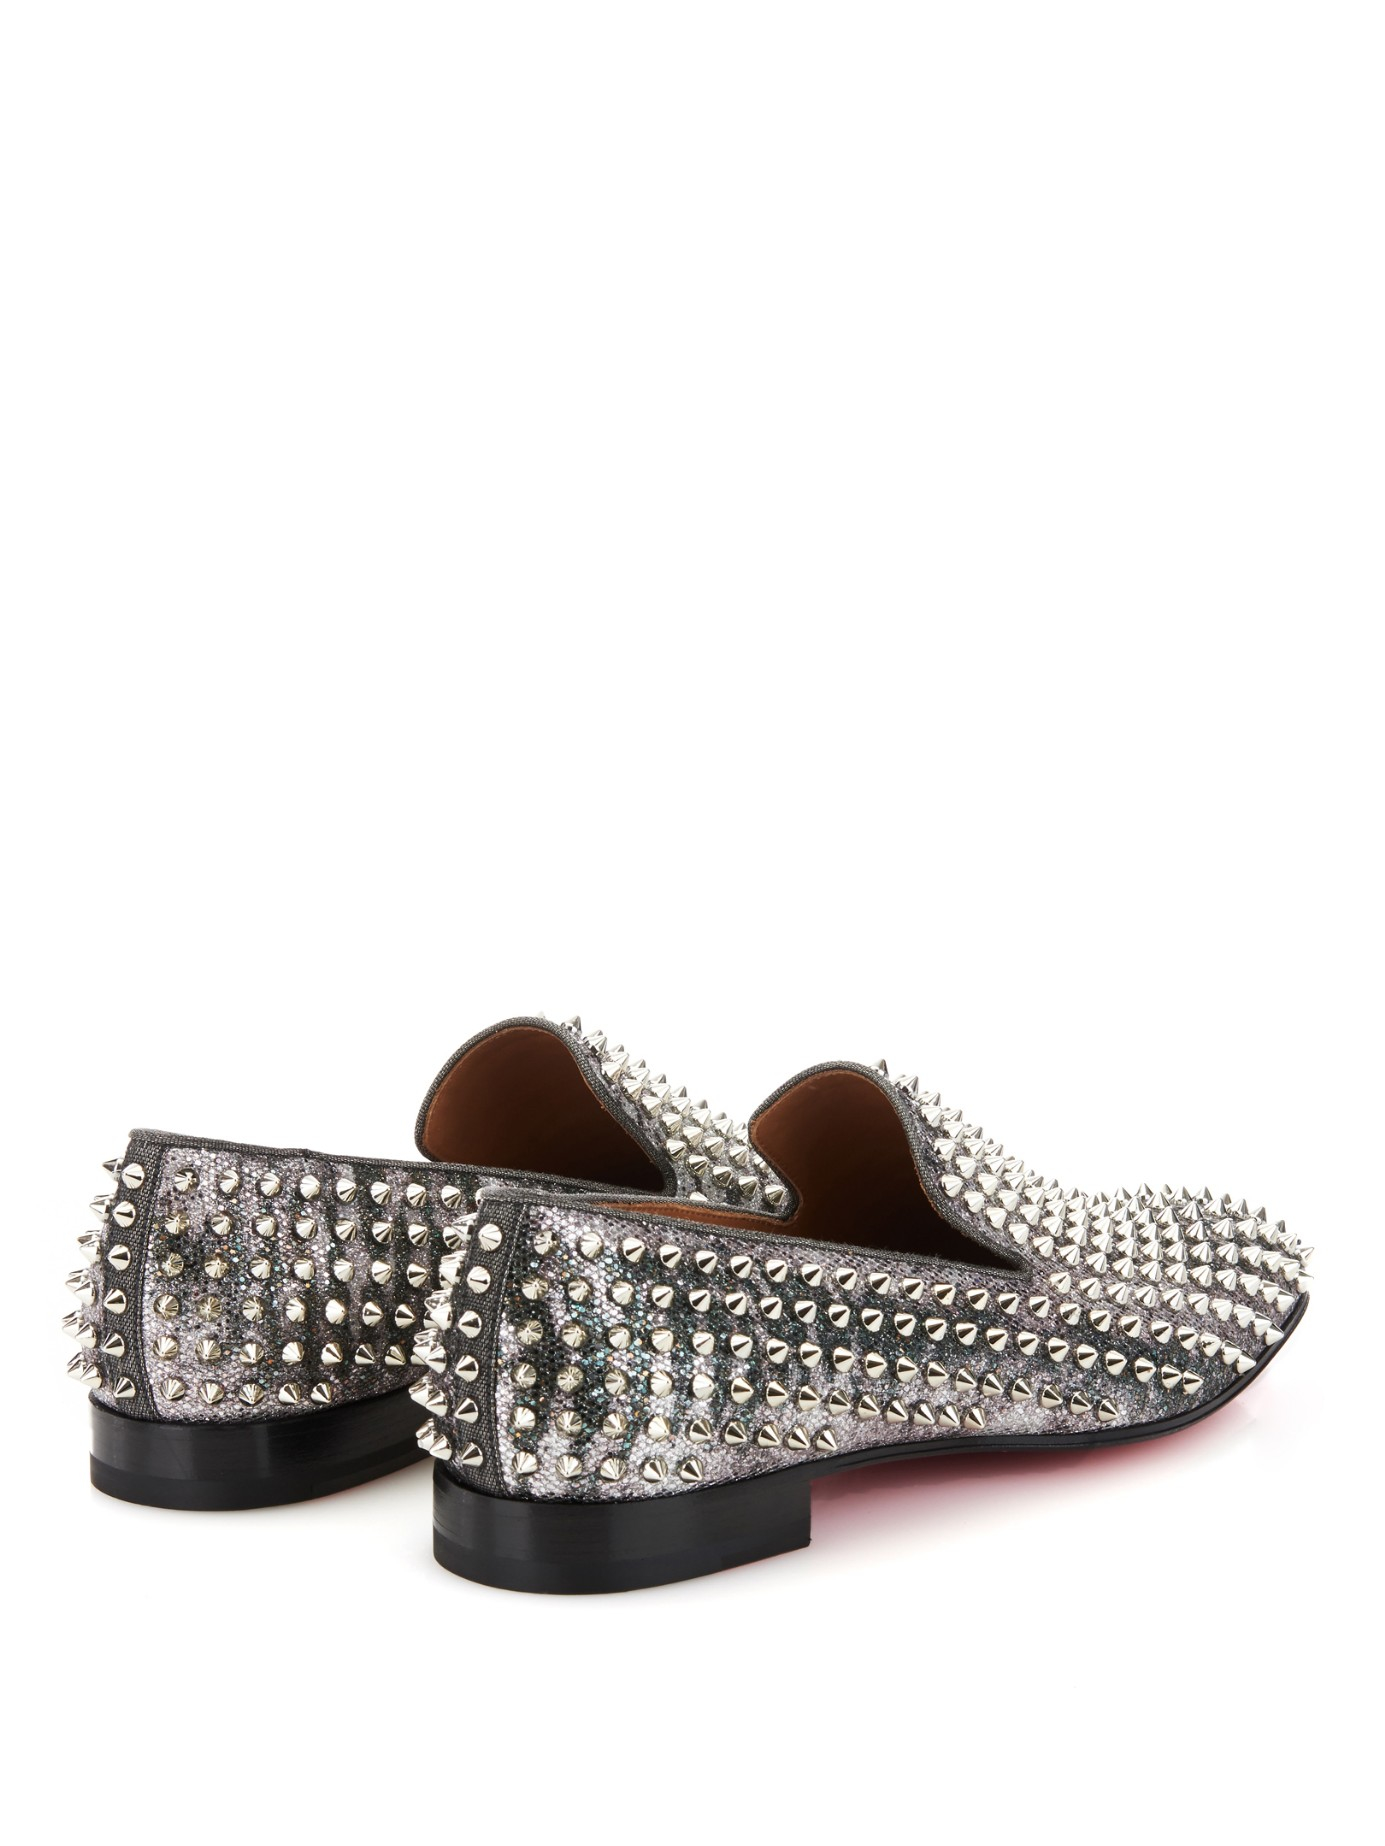 christian louboutins replica shoes - Christian louboutin Dandelion Studded Glitter Loafers in Silver ...